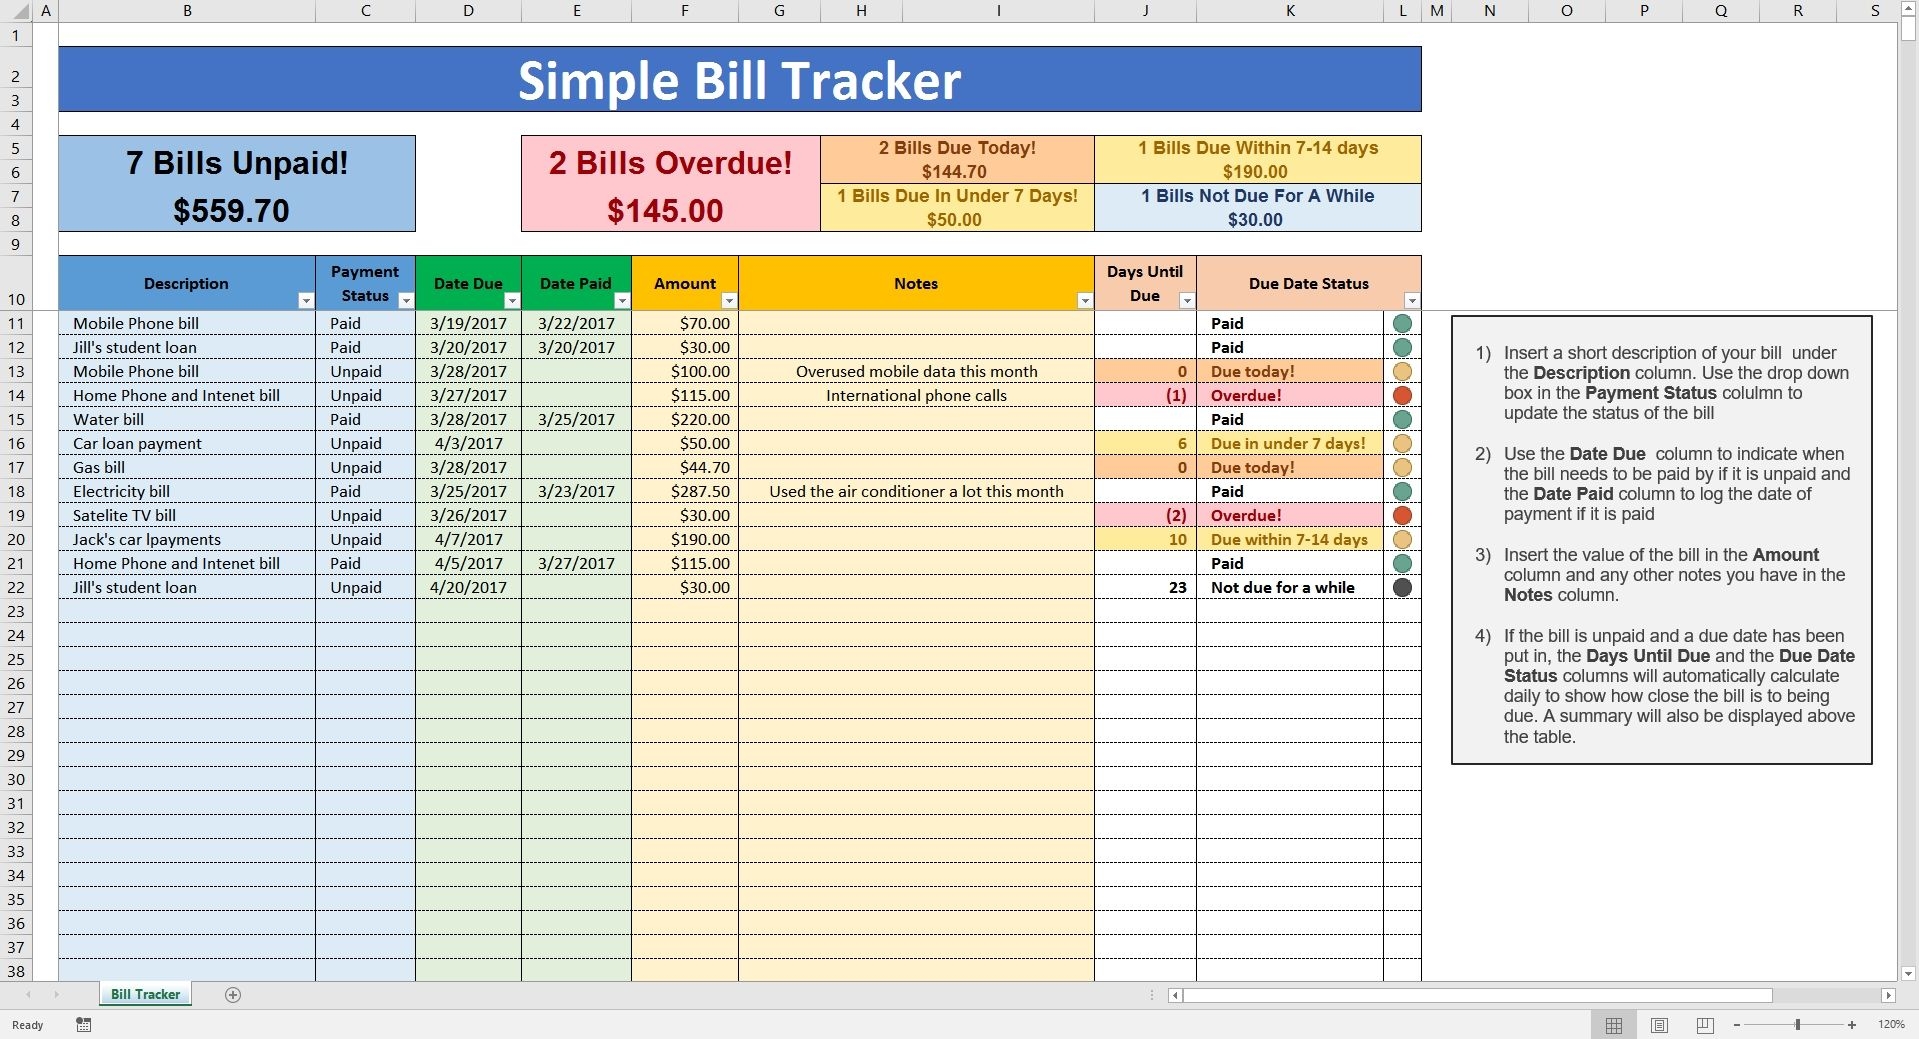 pin wwalter on organizing and planning accounts payable billing for 100 in spread sheet